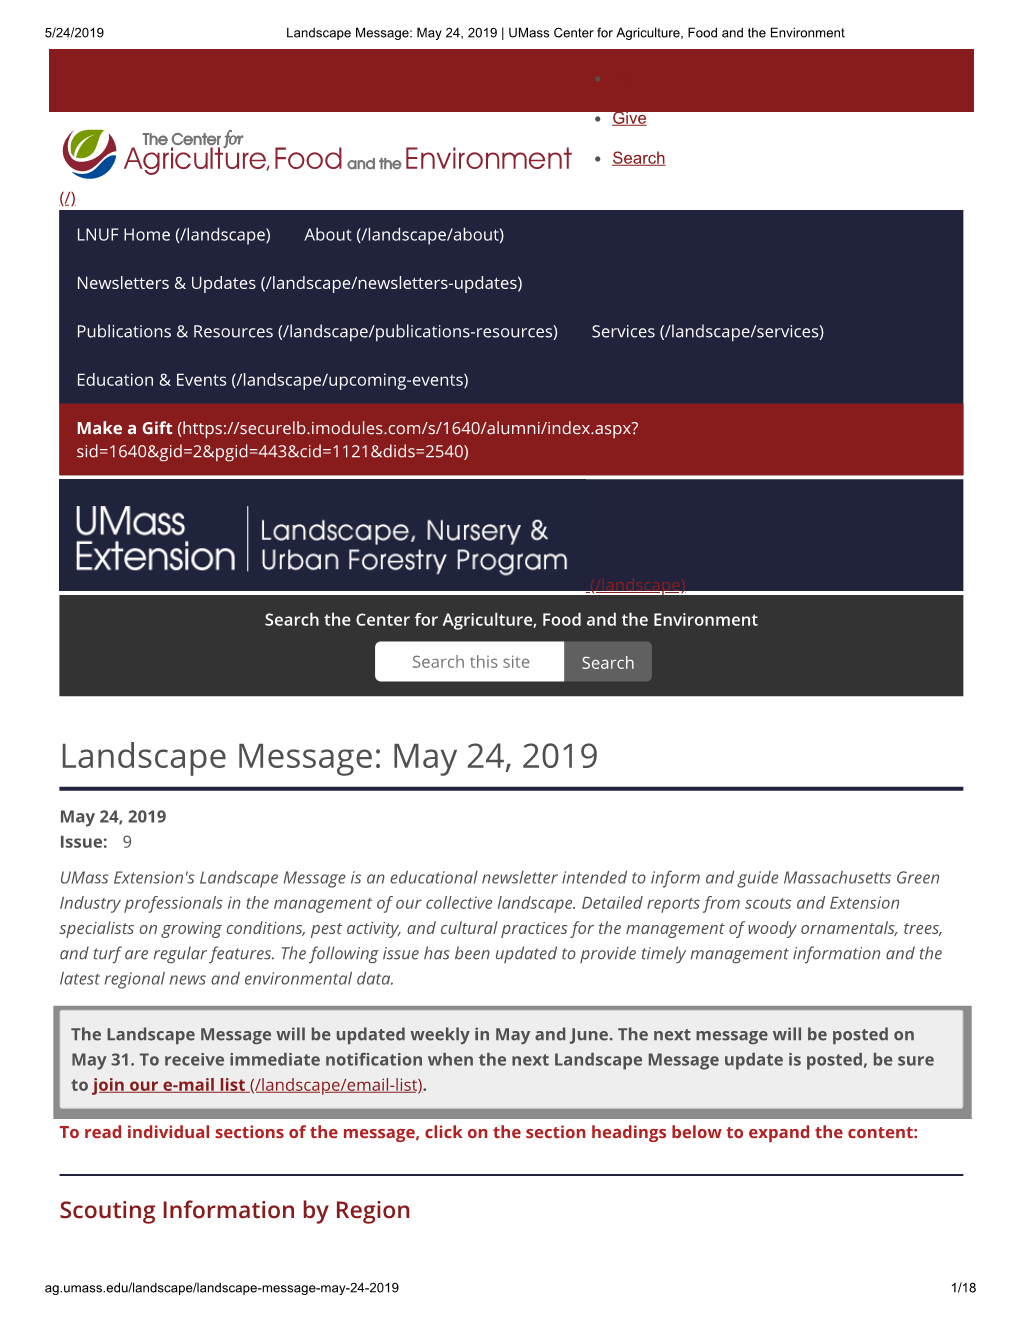 Landscape Message: May 24, 2019 | Umass Center for Agriculture, Food and the Environment